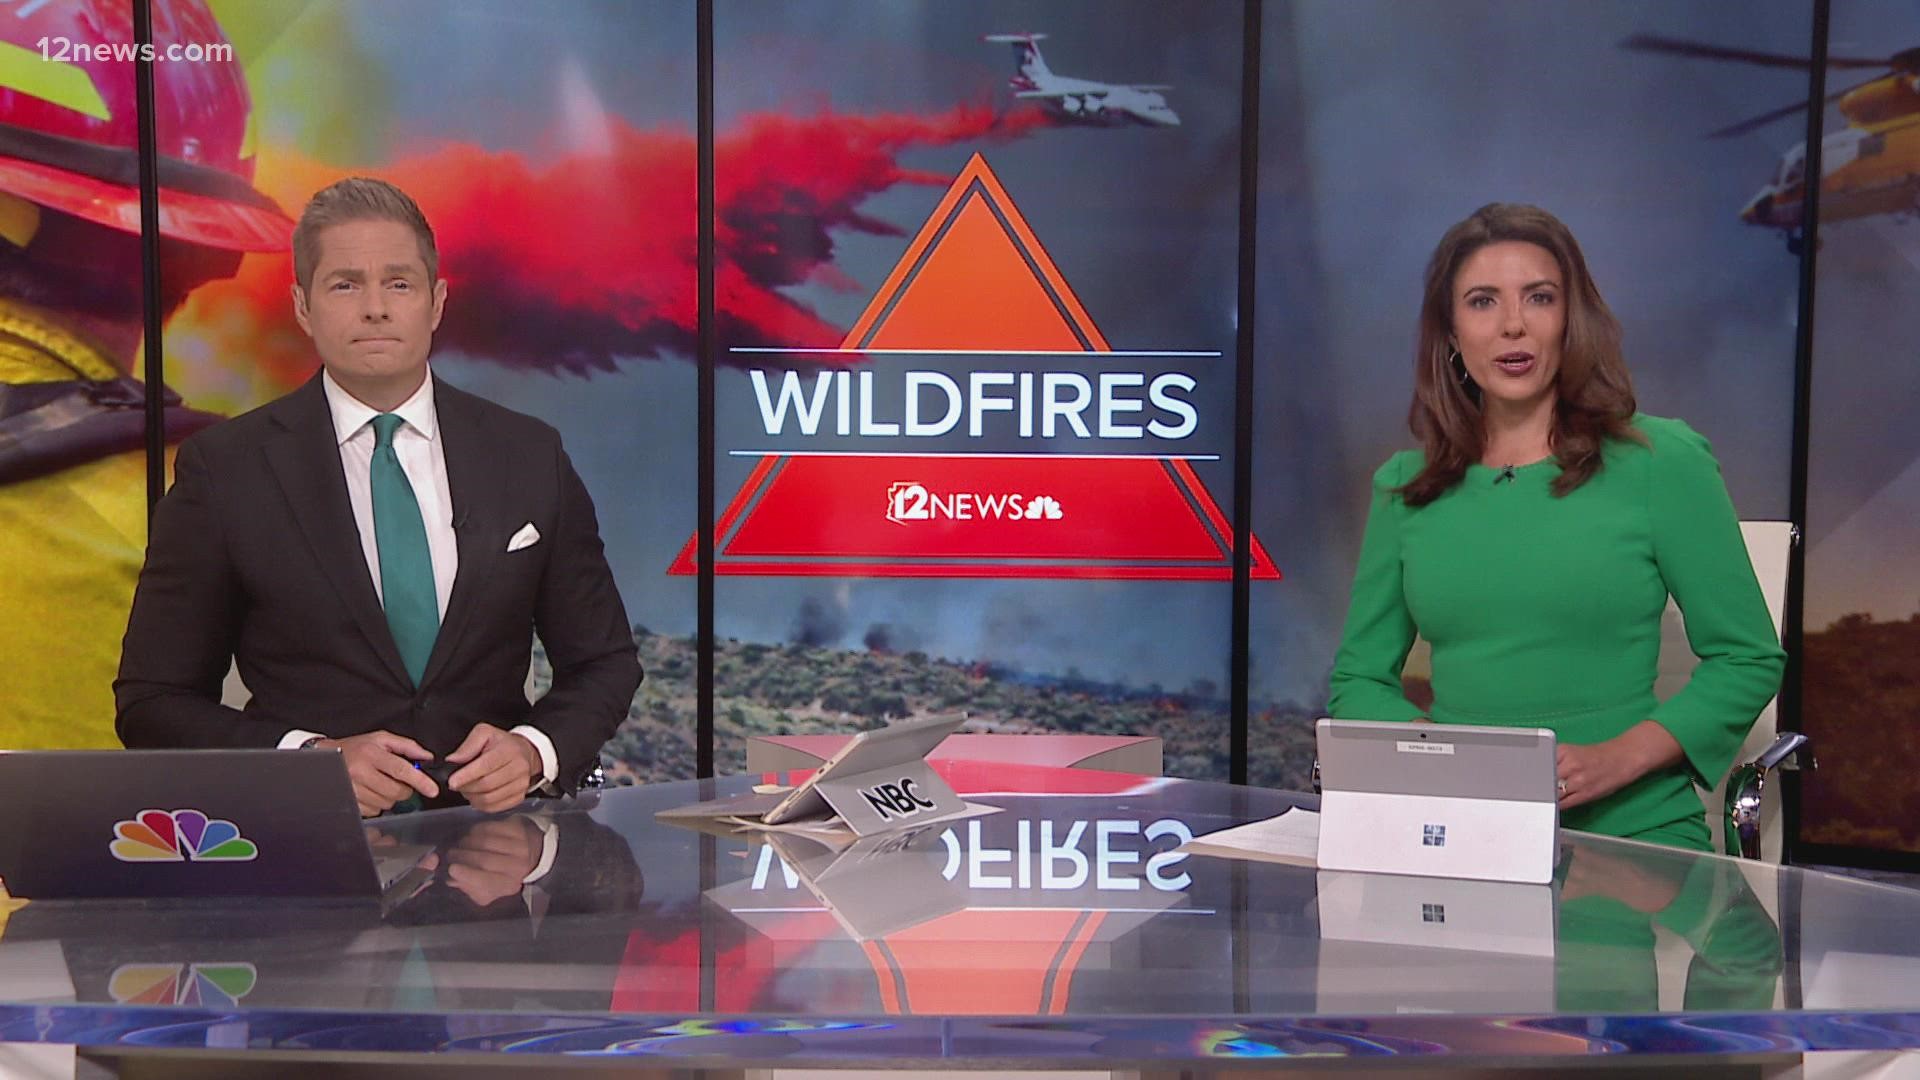 We have the latest updates on the Tunnel and Crooks fires burning in Arizona and other headlines for April 20, 2022.